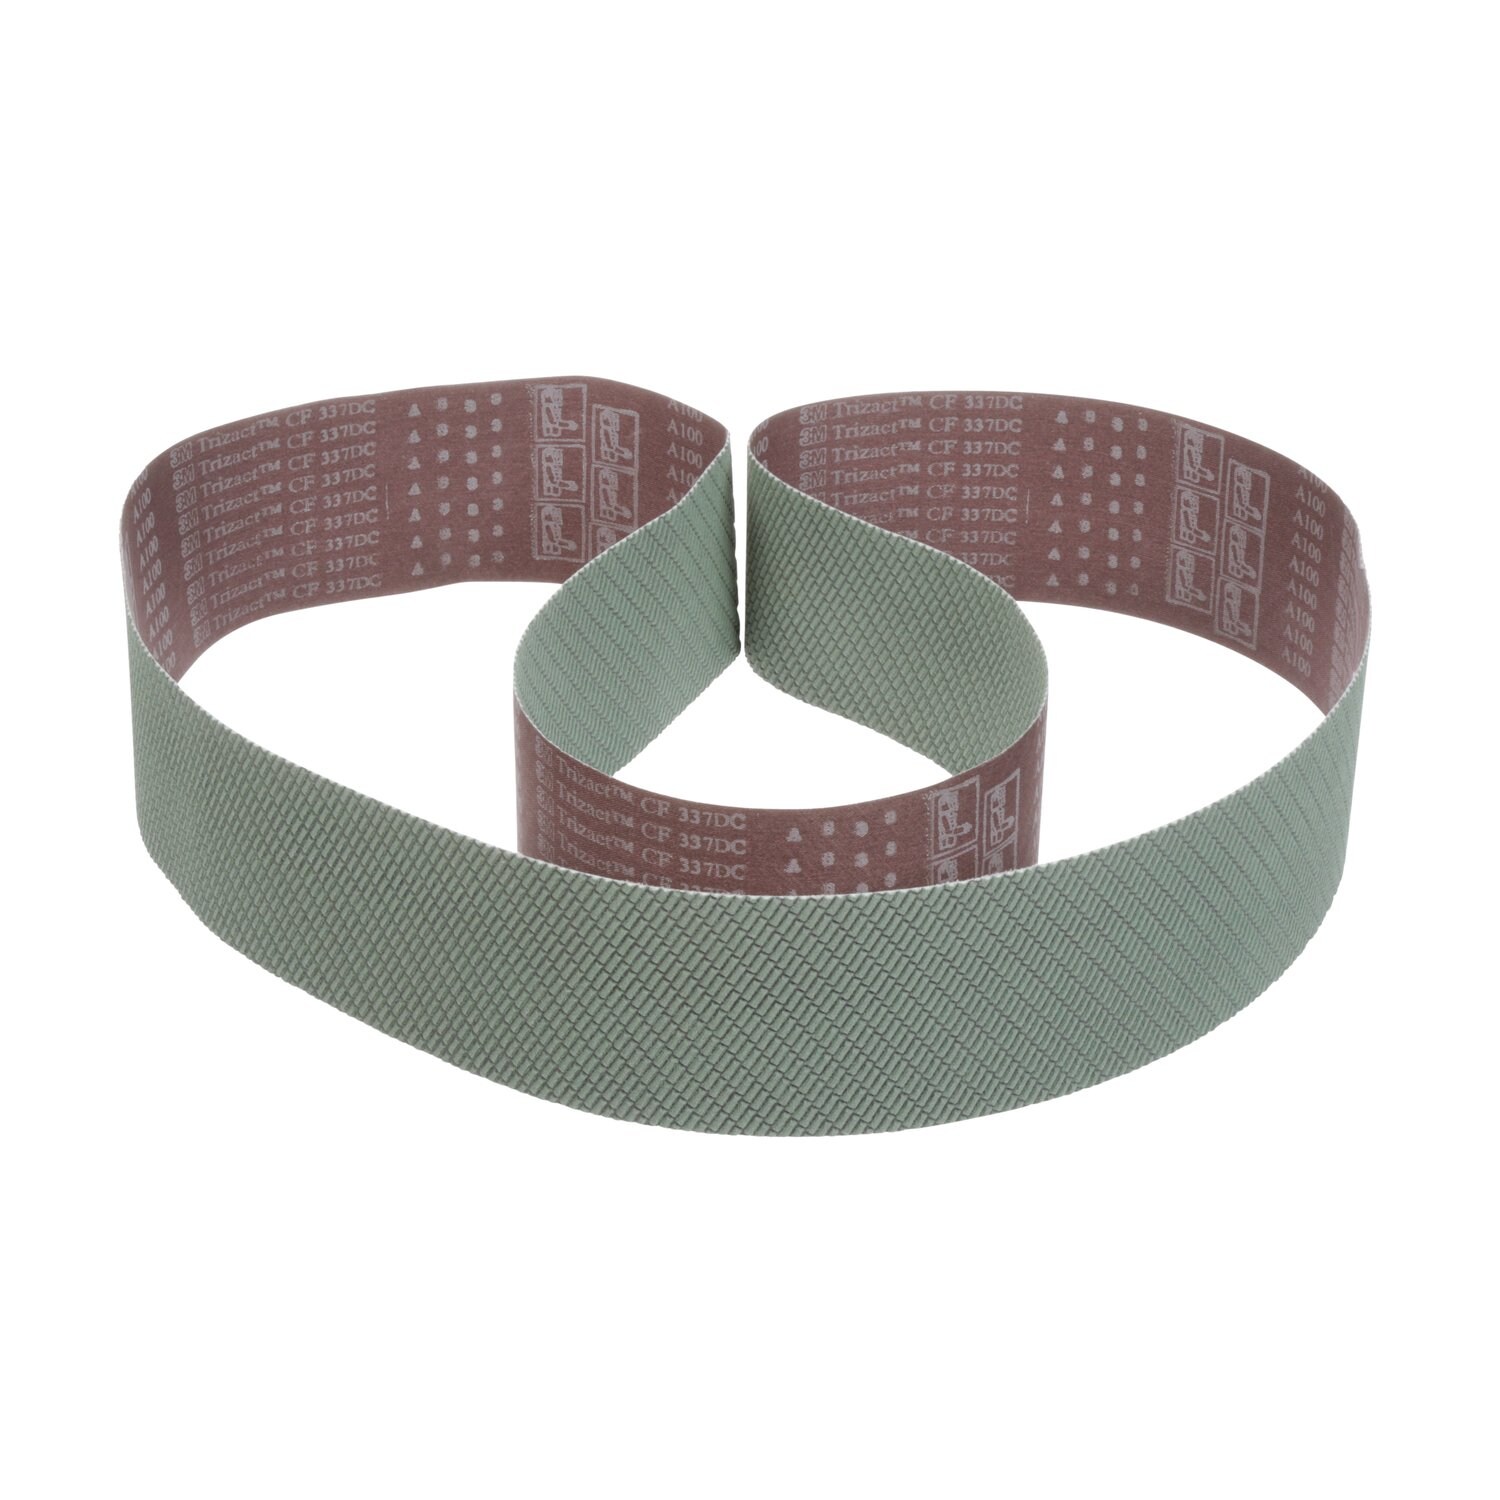 7100052826 - 3M Trizact Cloth Belt 337DC, A45 X-weight, Config